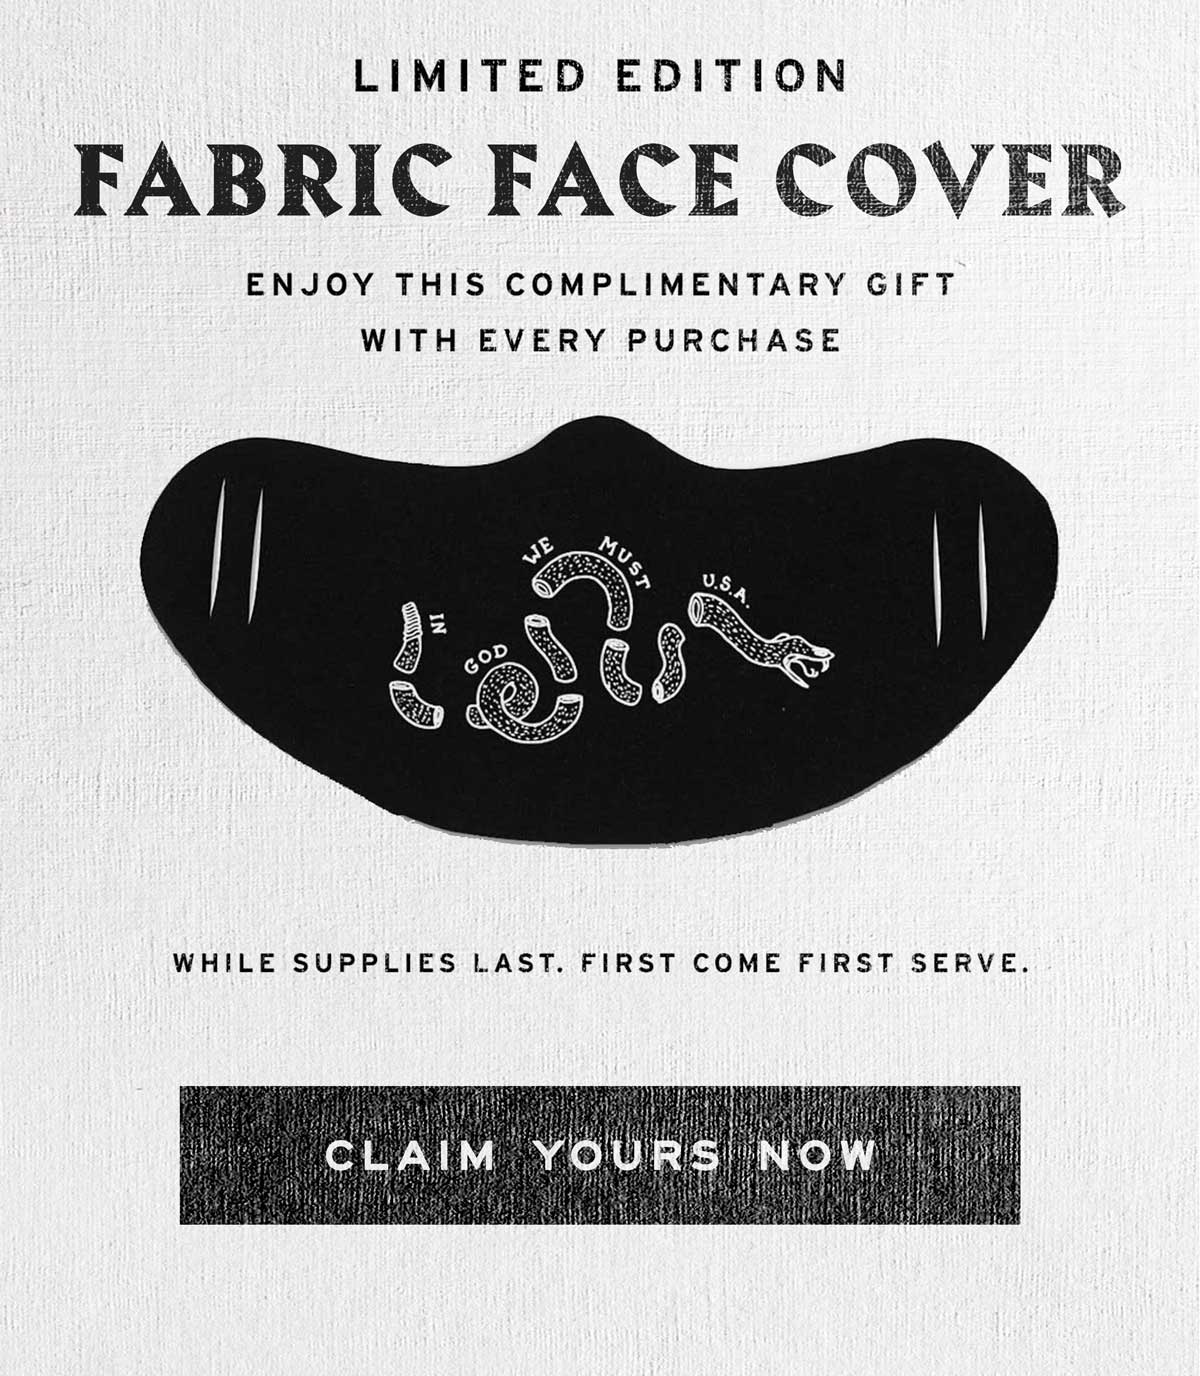 LIited Edition Fabric Face Cover Available on All Orders. First Come FIrst Serve